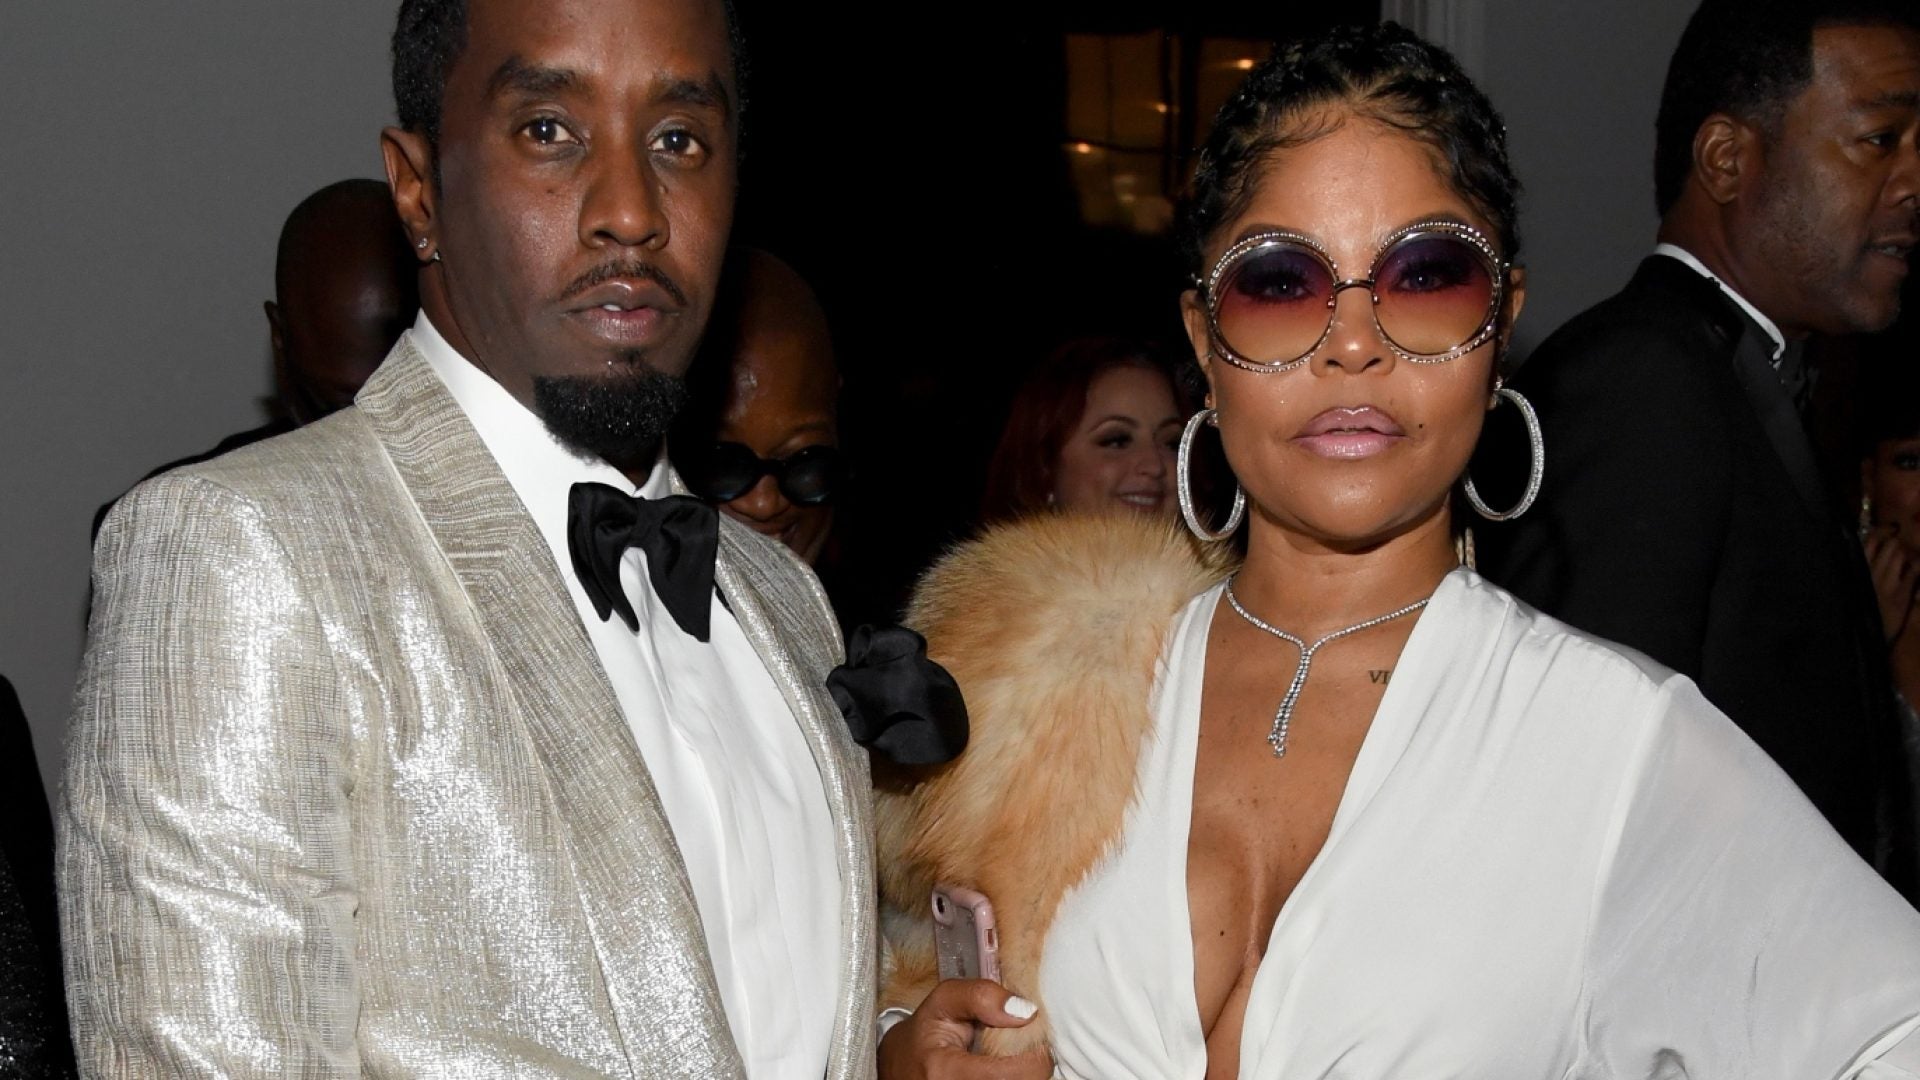 Misa Hylton Is Calling Out Diddy Over Their Son's Recent DUI